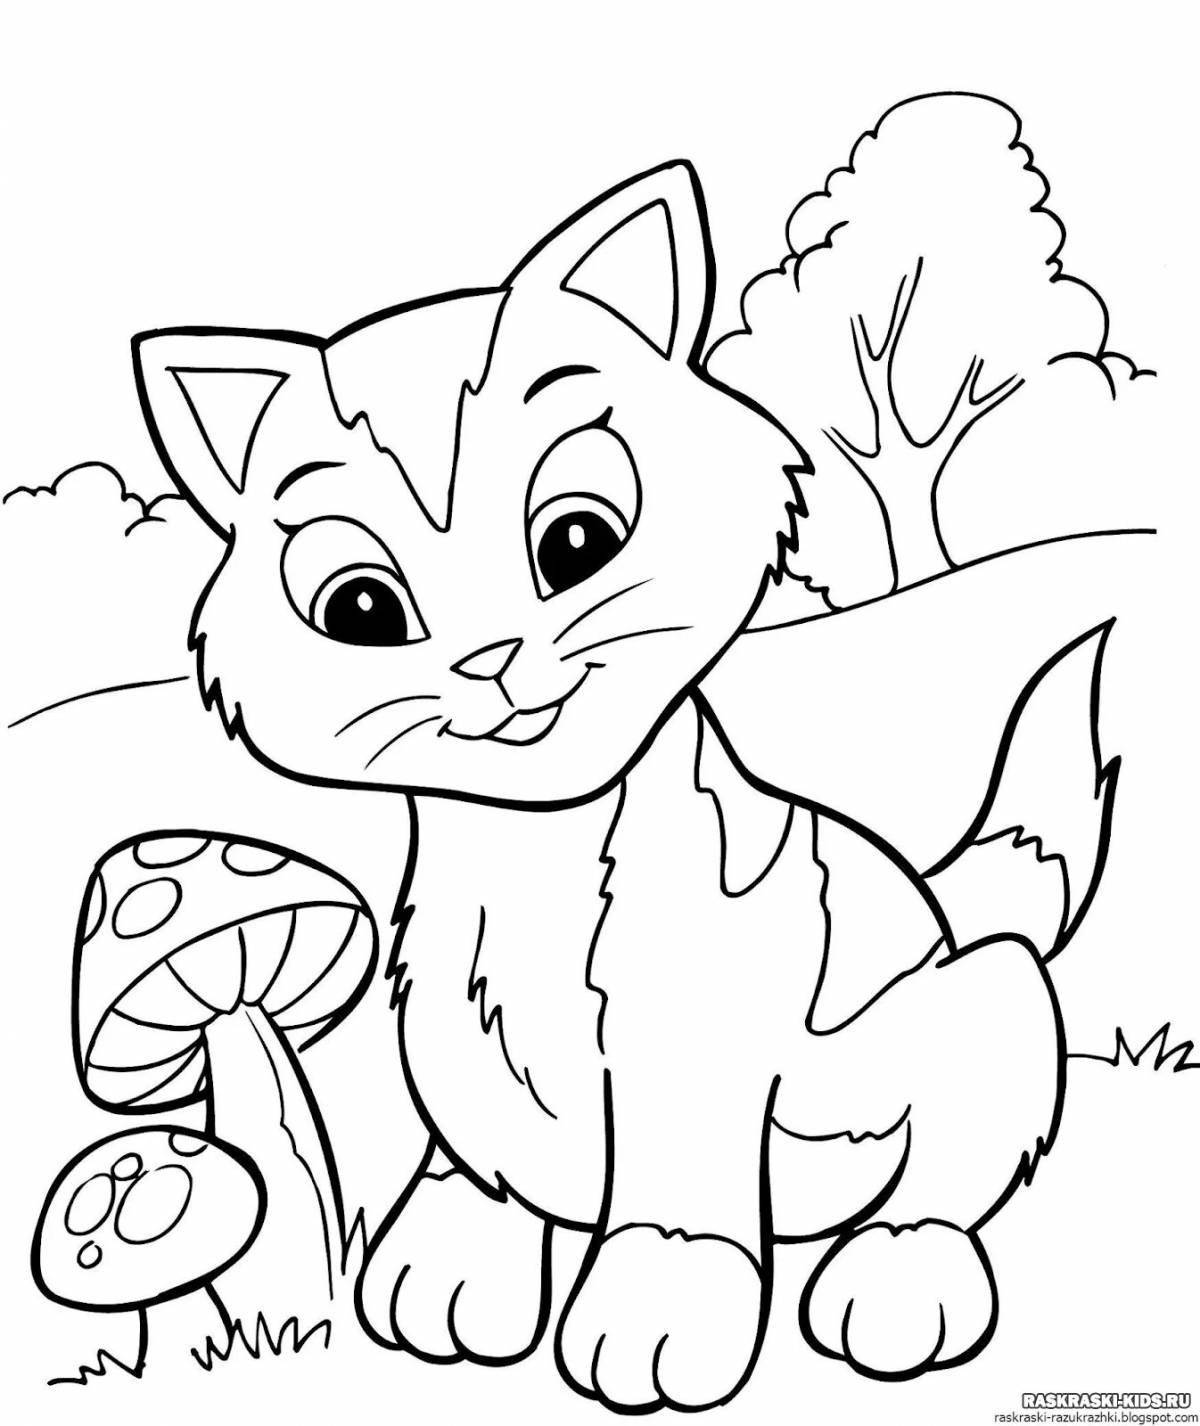 Dazzling animal coloring pages for girls